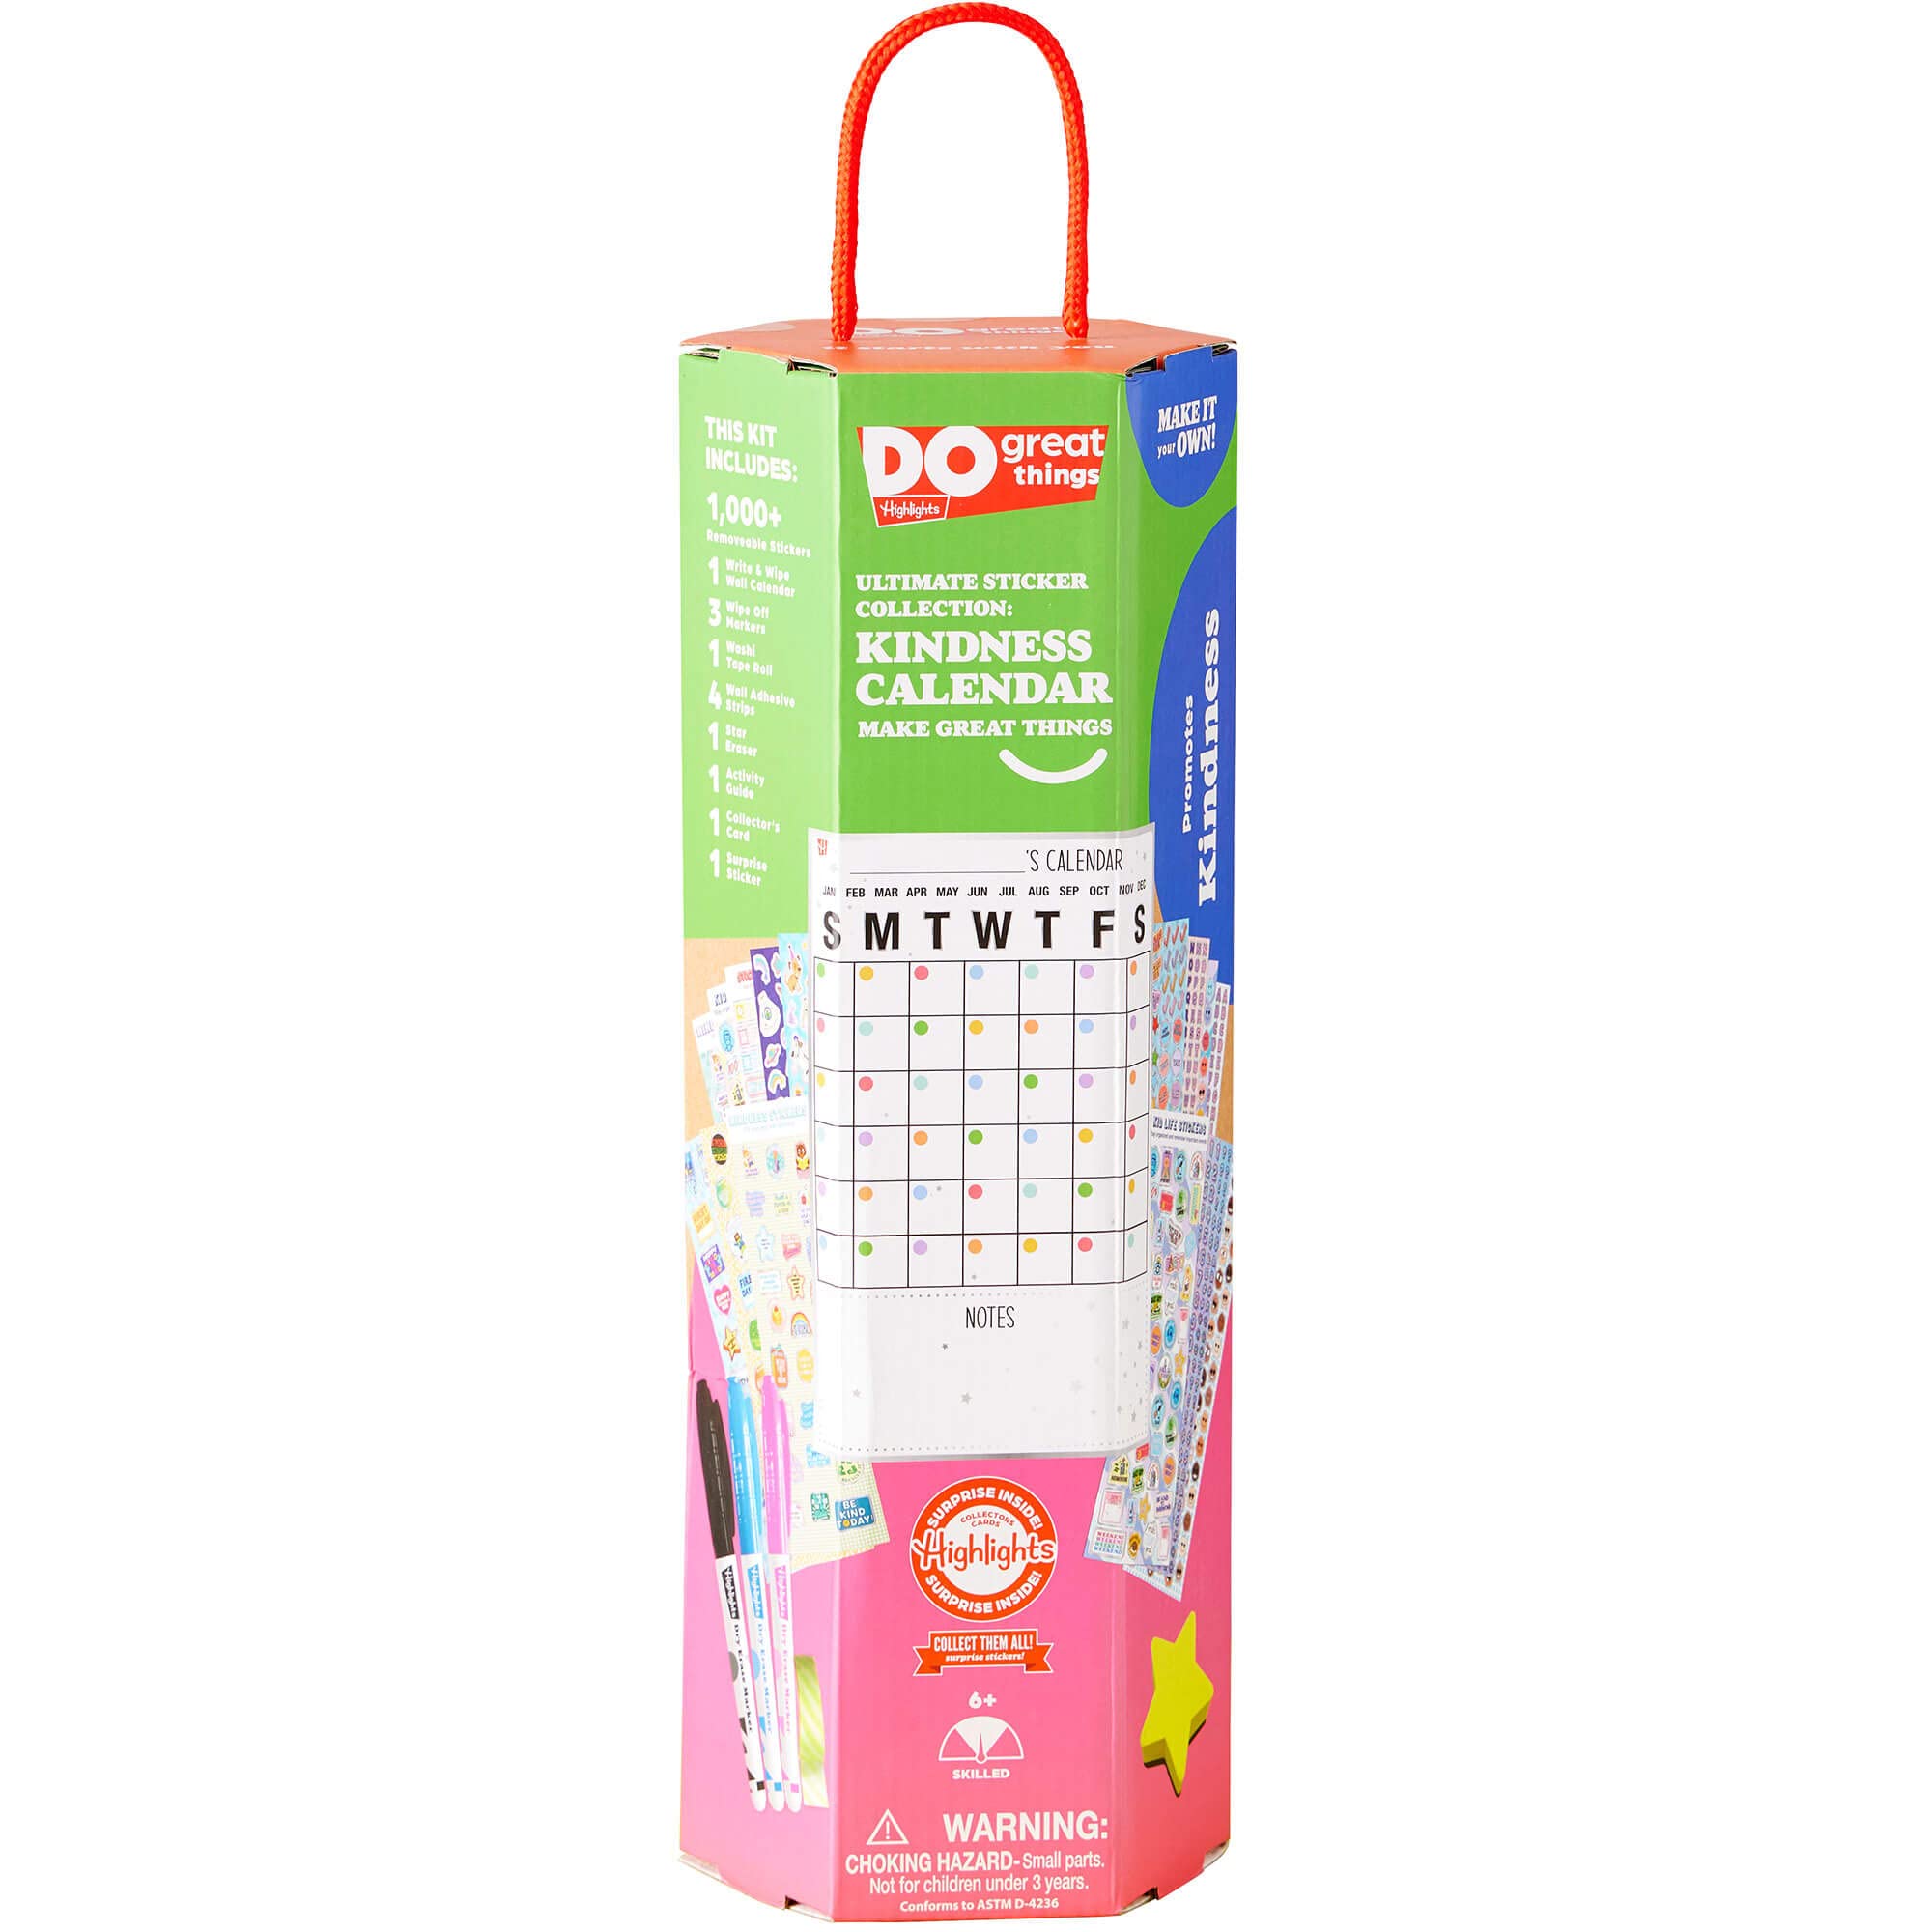 Highlights Kindness Dry-Erase Calendar for Kids, Includes 1300+ Reusable Stickers, Customizable Wall Calendar Promotes Self-Expression and Organization, Ages 6+